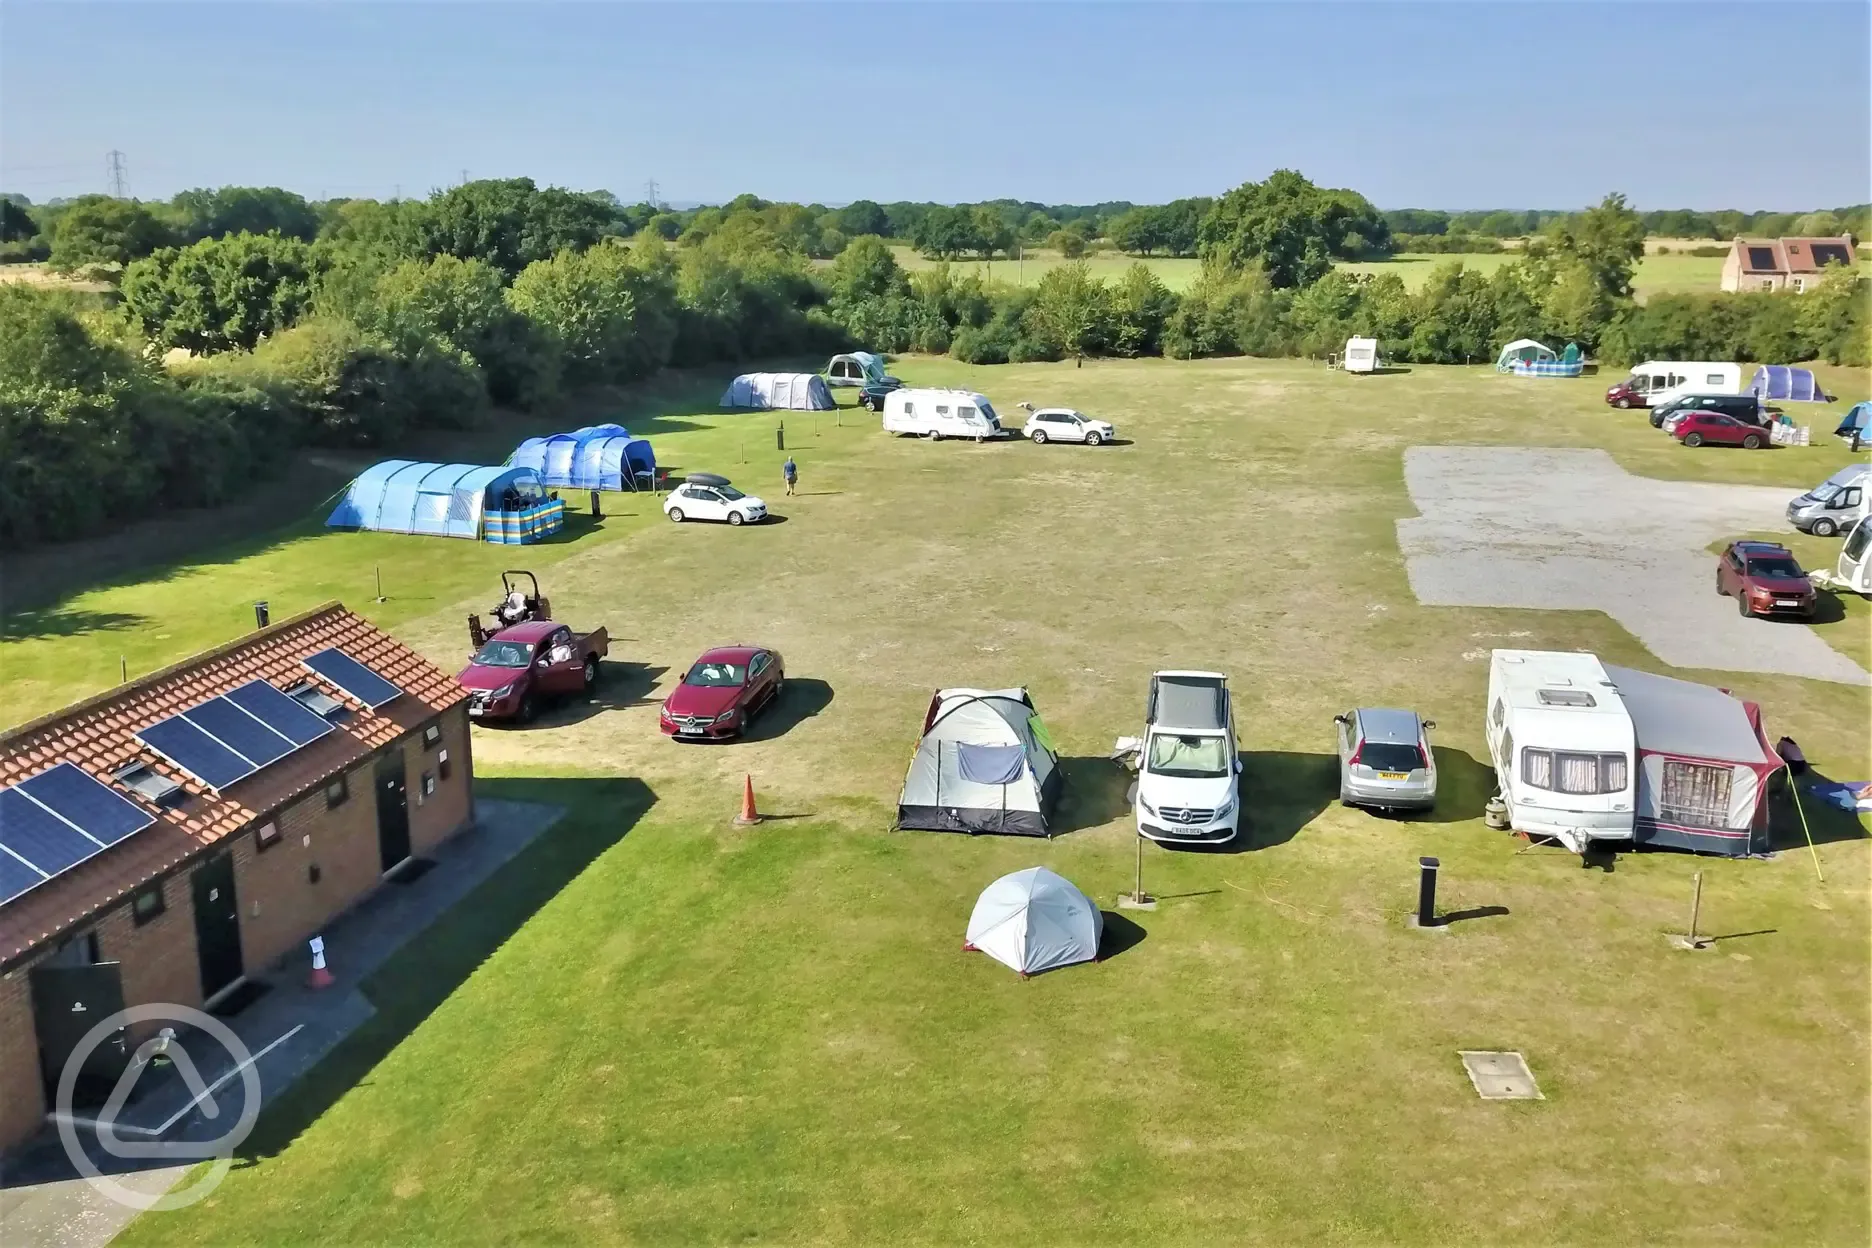 Hardstanding and grass tent pitches